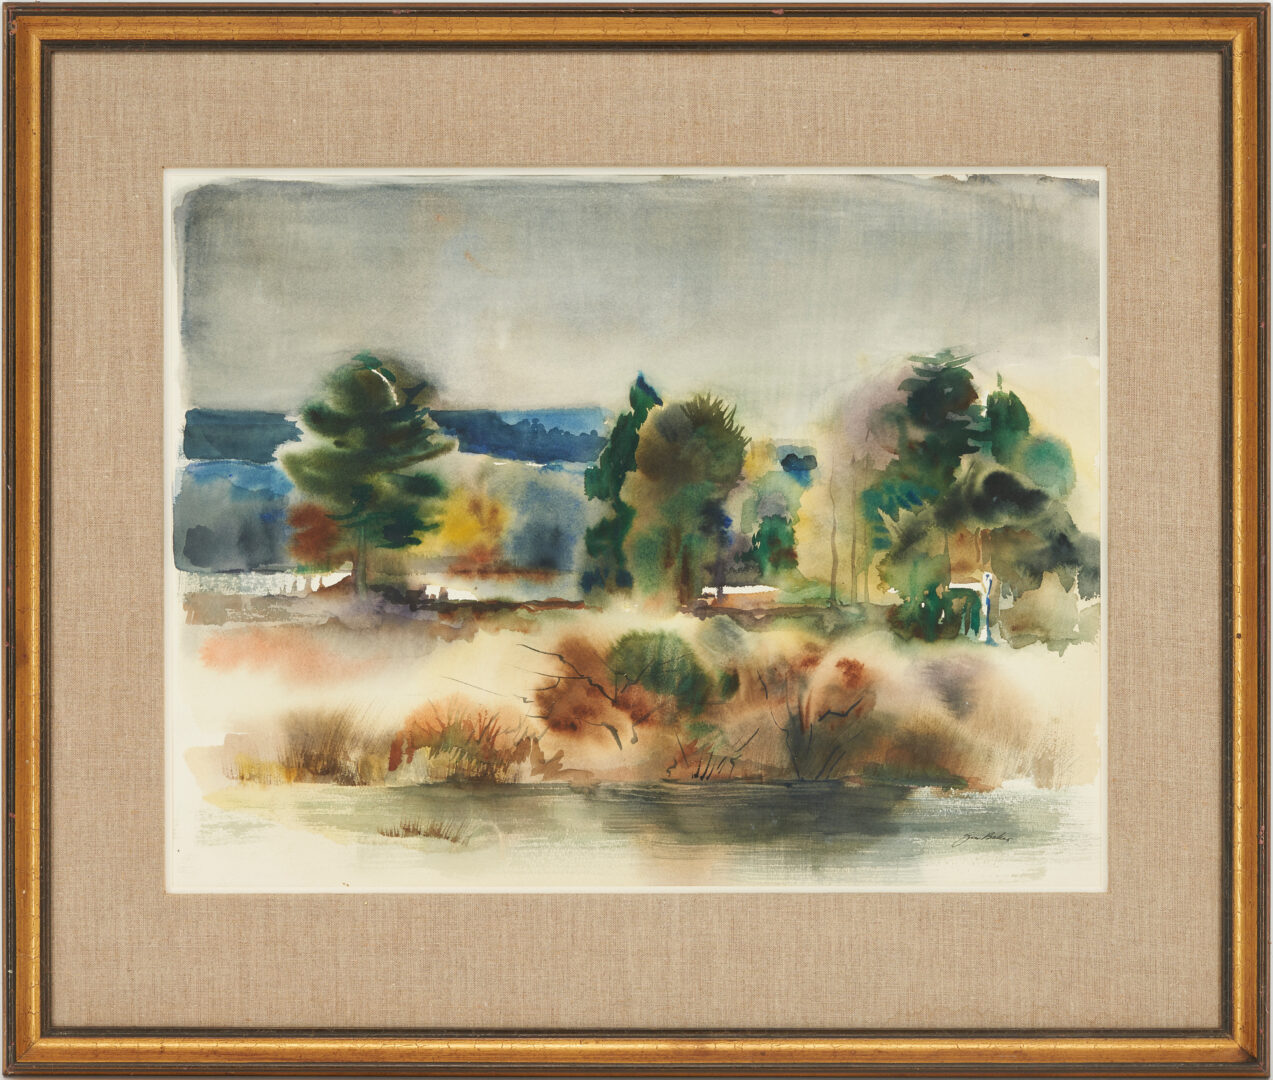 Lot 438: 2 Gus Baker Watercolor Paintings, Landscape & Abstract